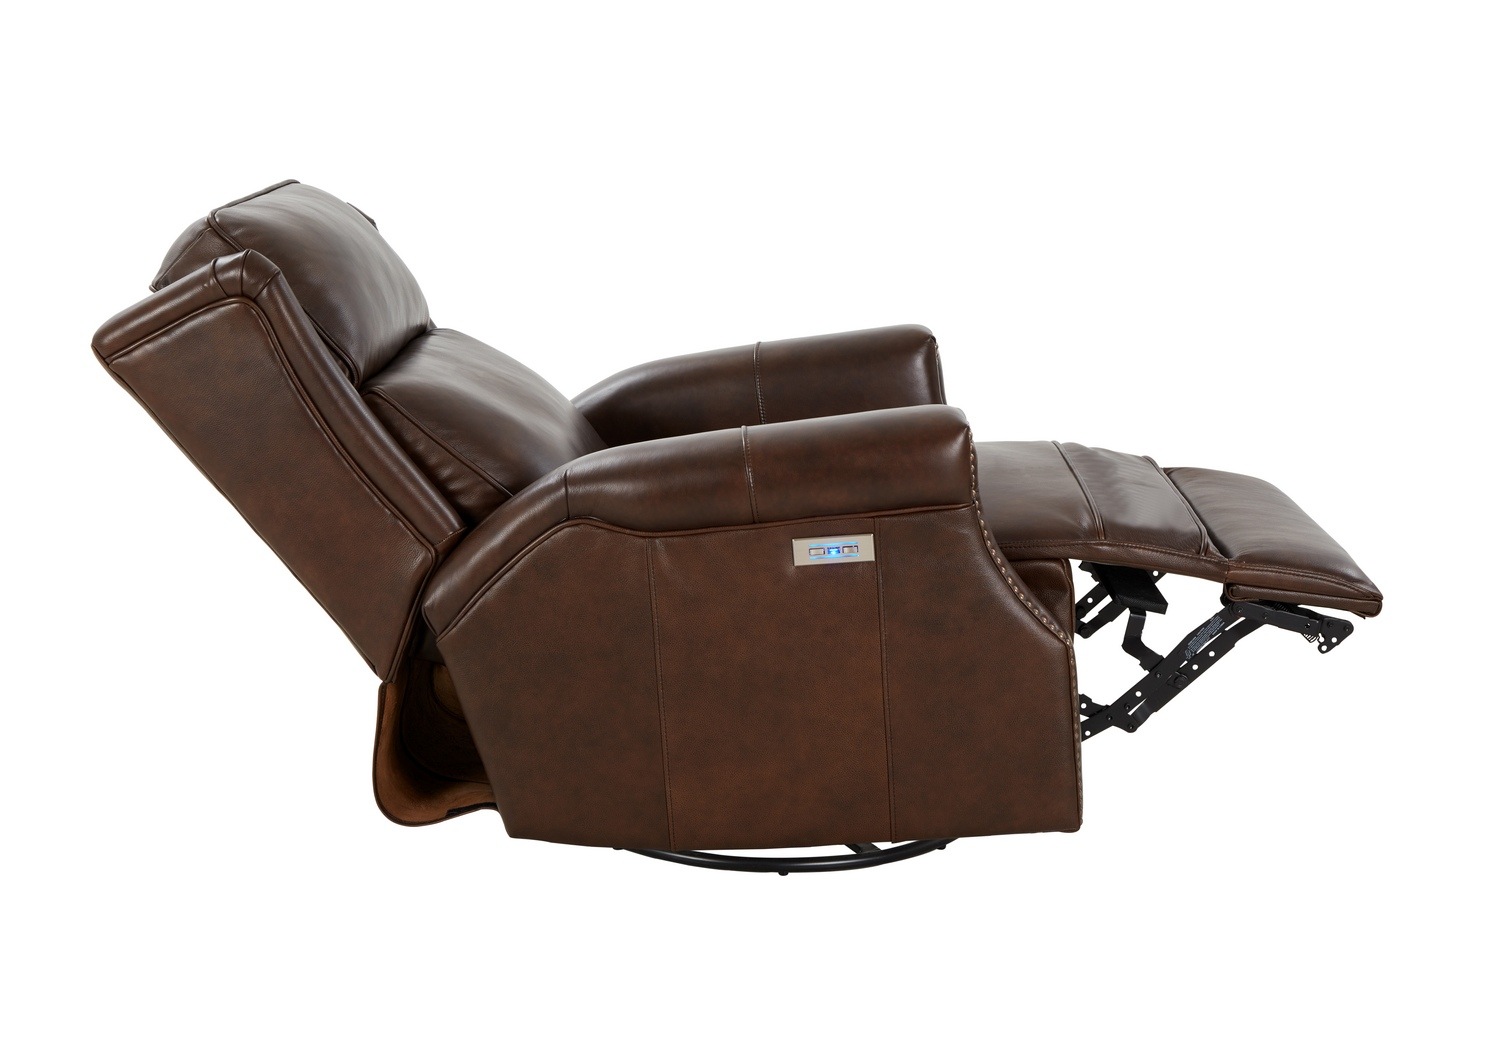 Barcalounger Brookmore Swivel Glider Recliner Chair with Power Recline and Power Head Rest - Ashford Walnut/All Leather